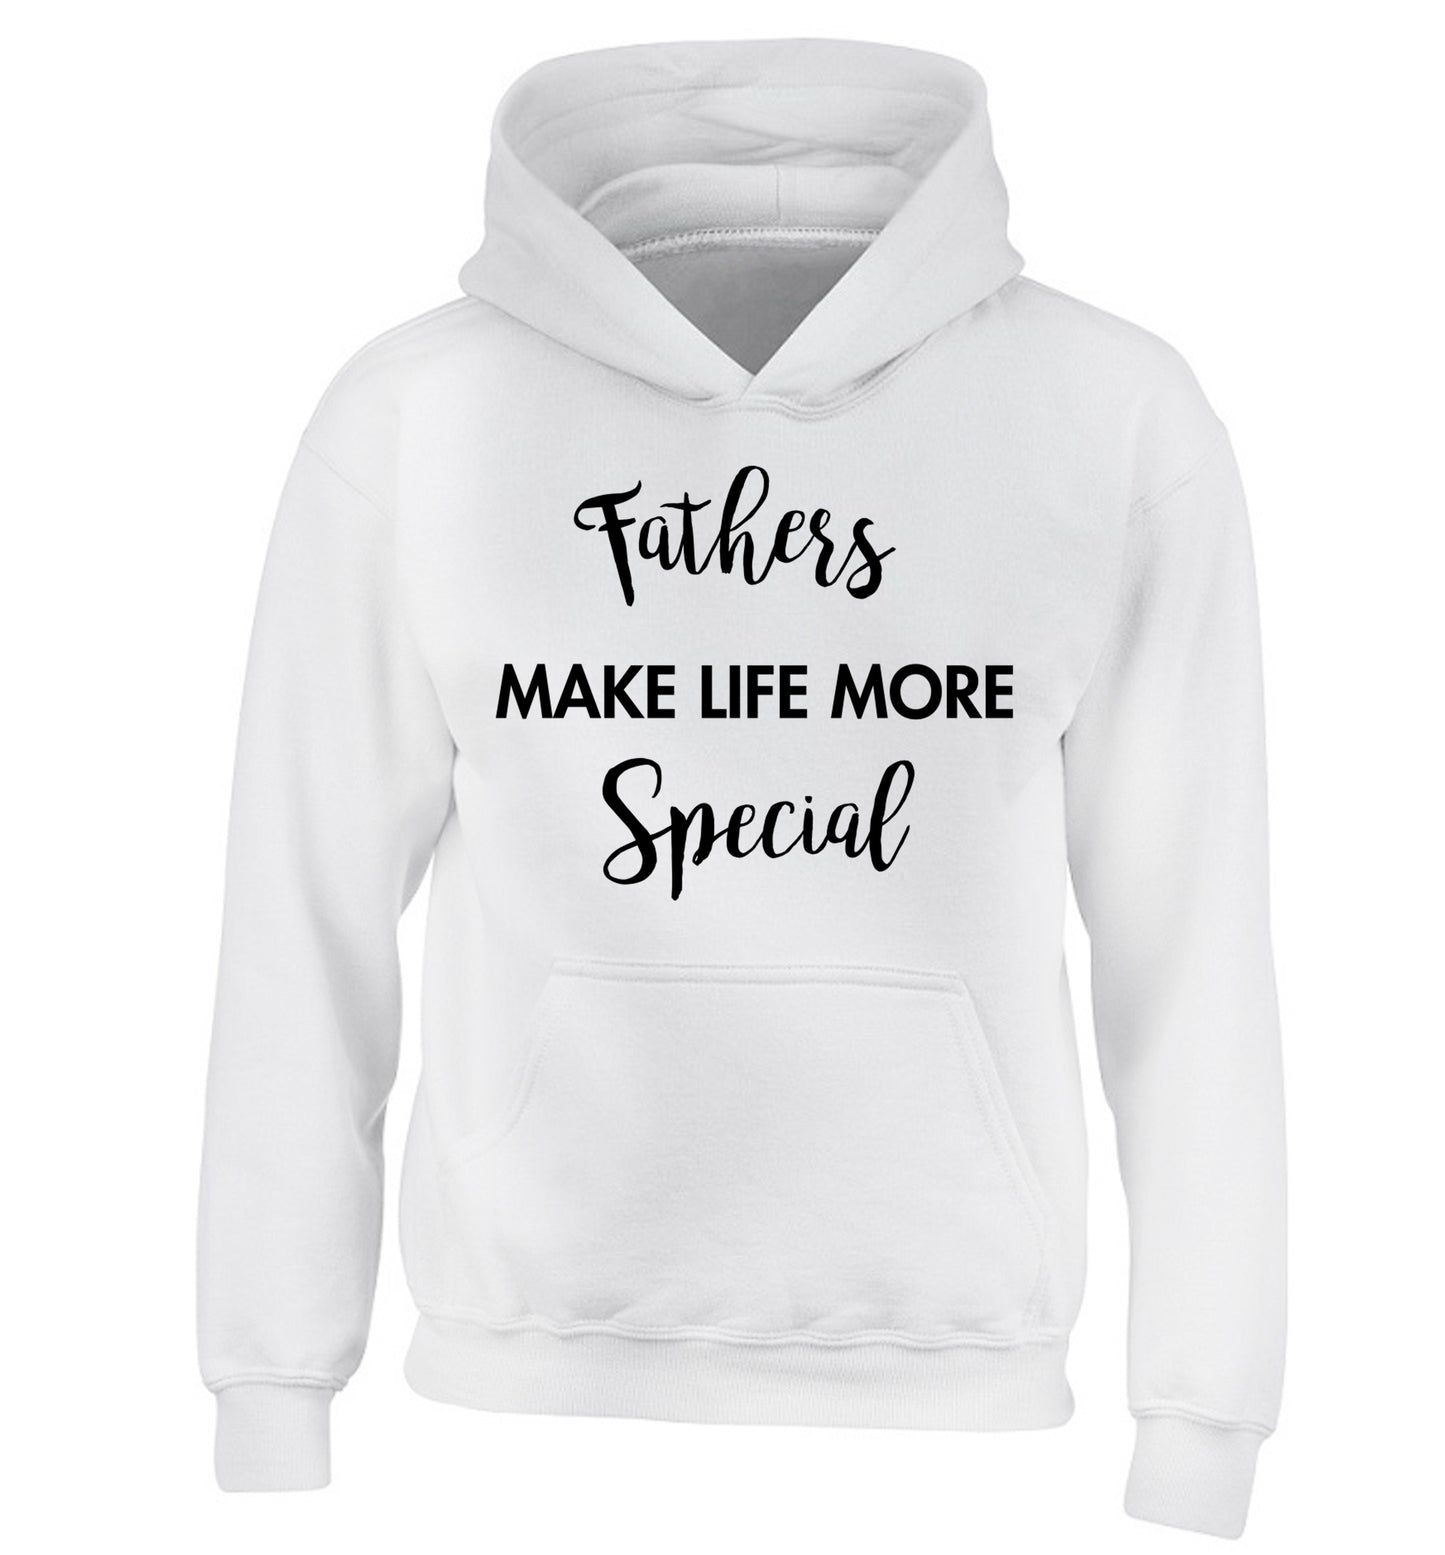 Fathers make life more special children's white hoodie 12-14 Years